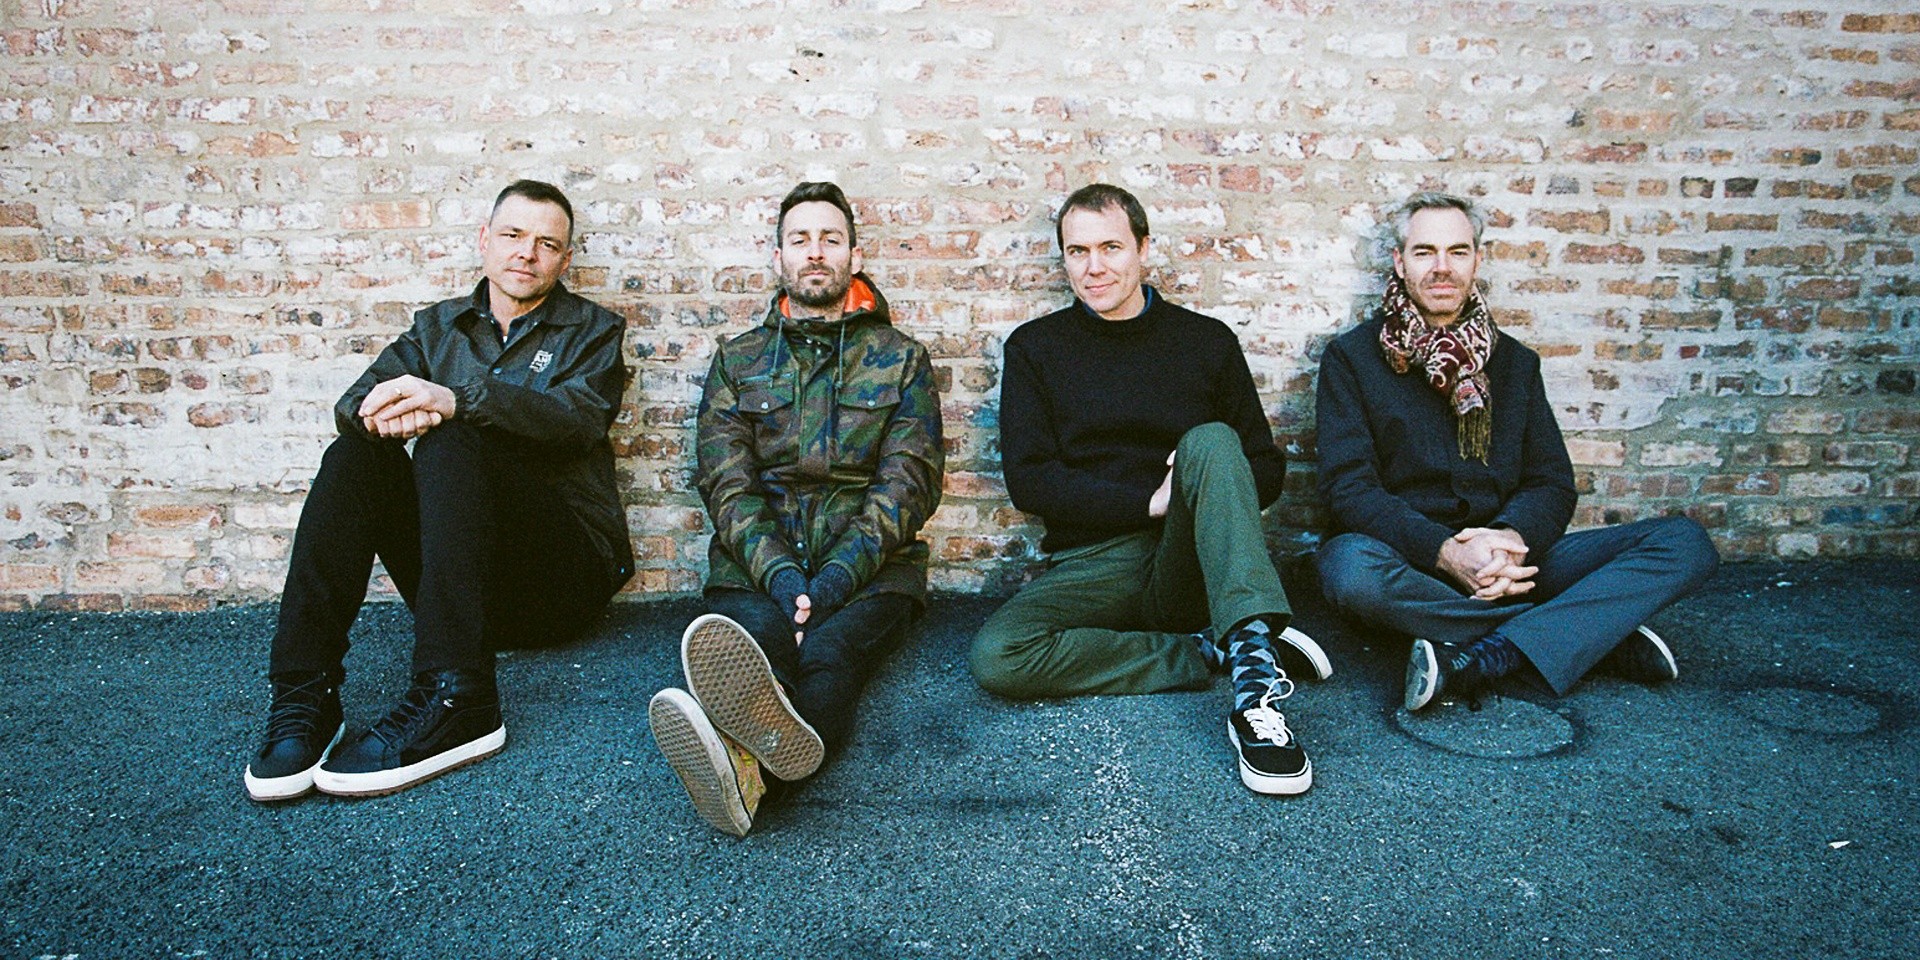 American Football Live in Manila: Here's what you need to know